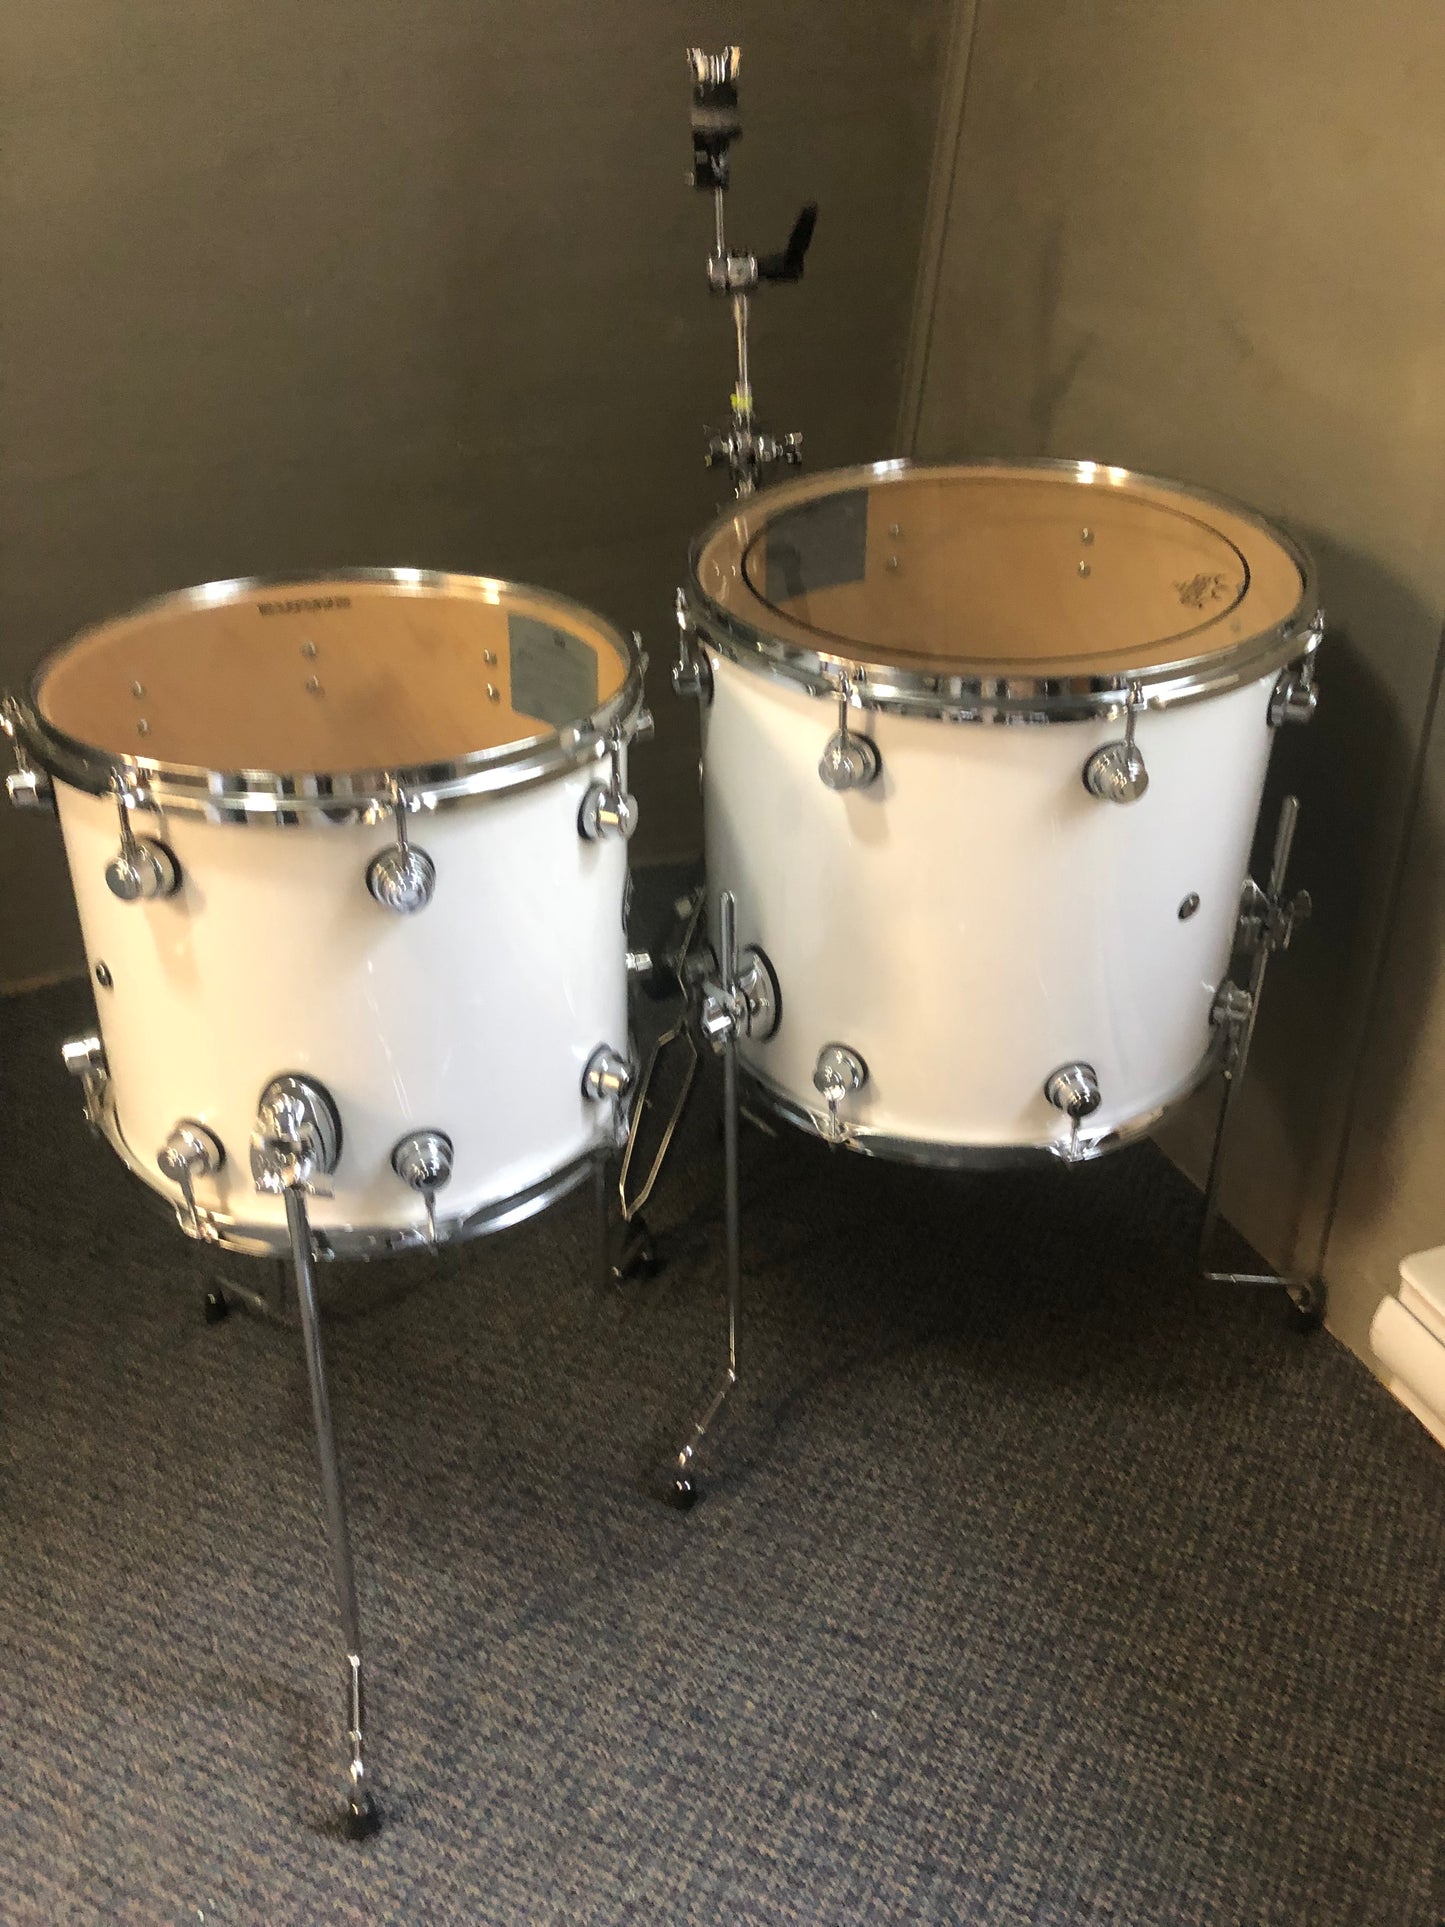 DW Drum Workshop Performance Series Drum Kit with Hardware - Ice White - Mint Used